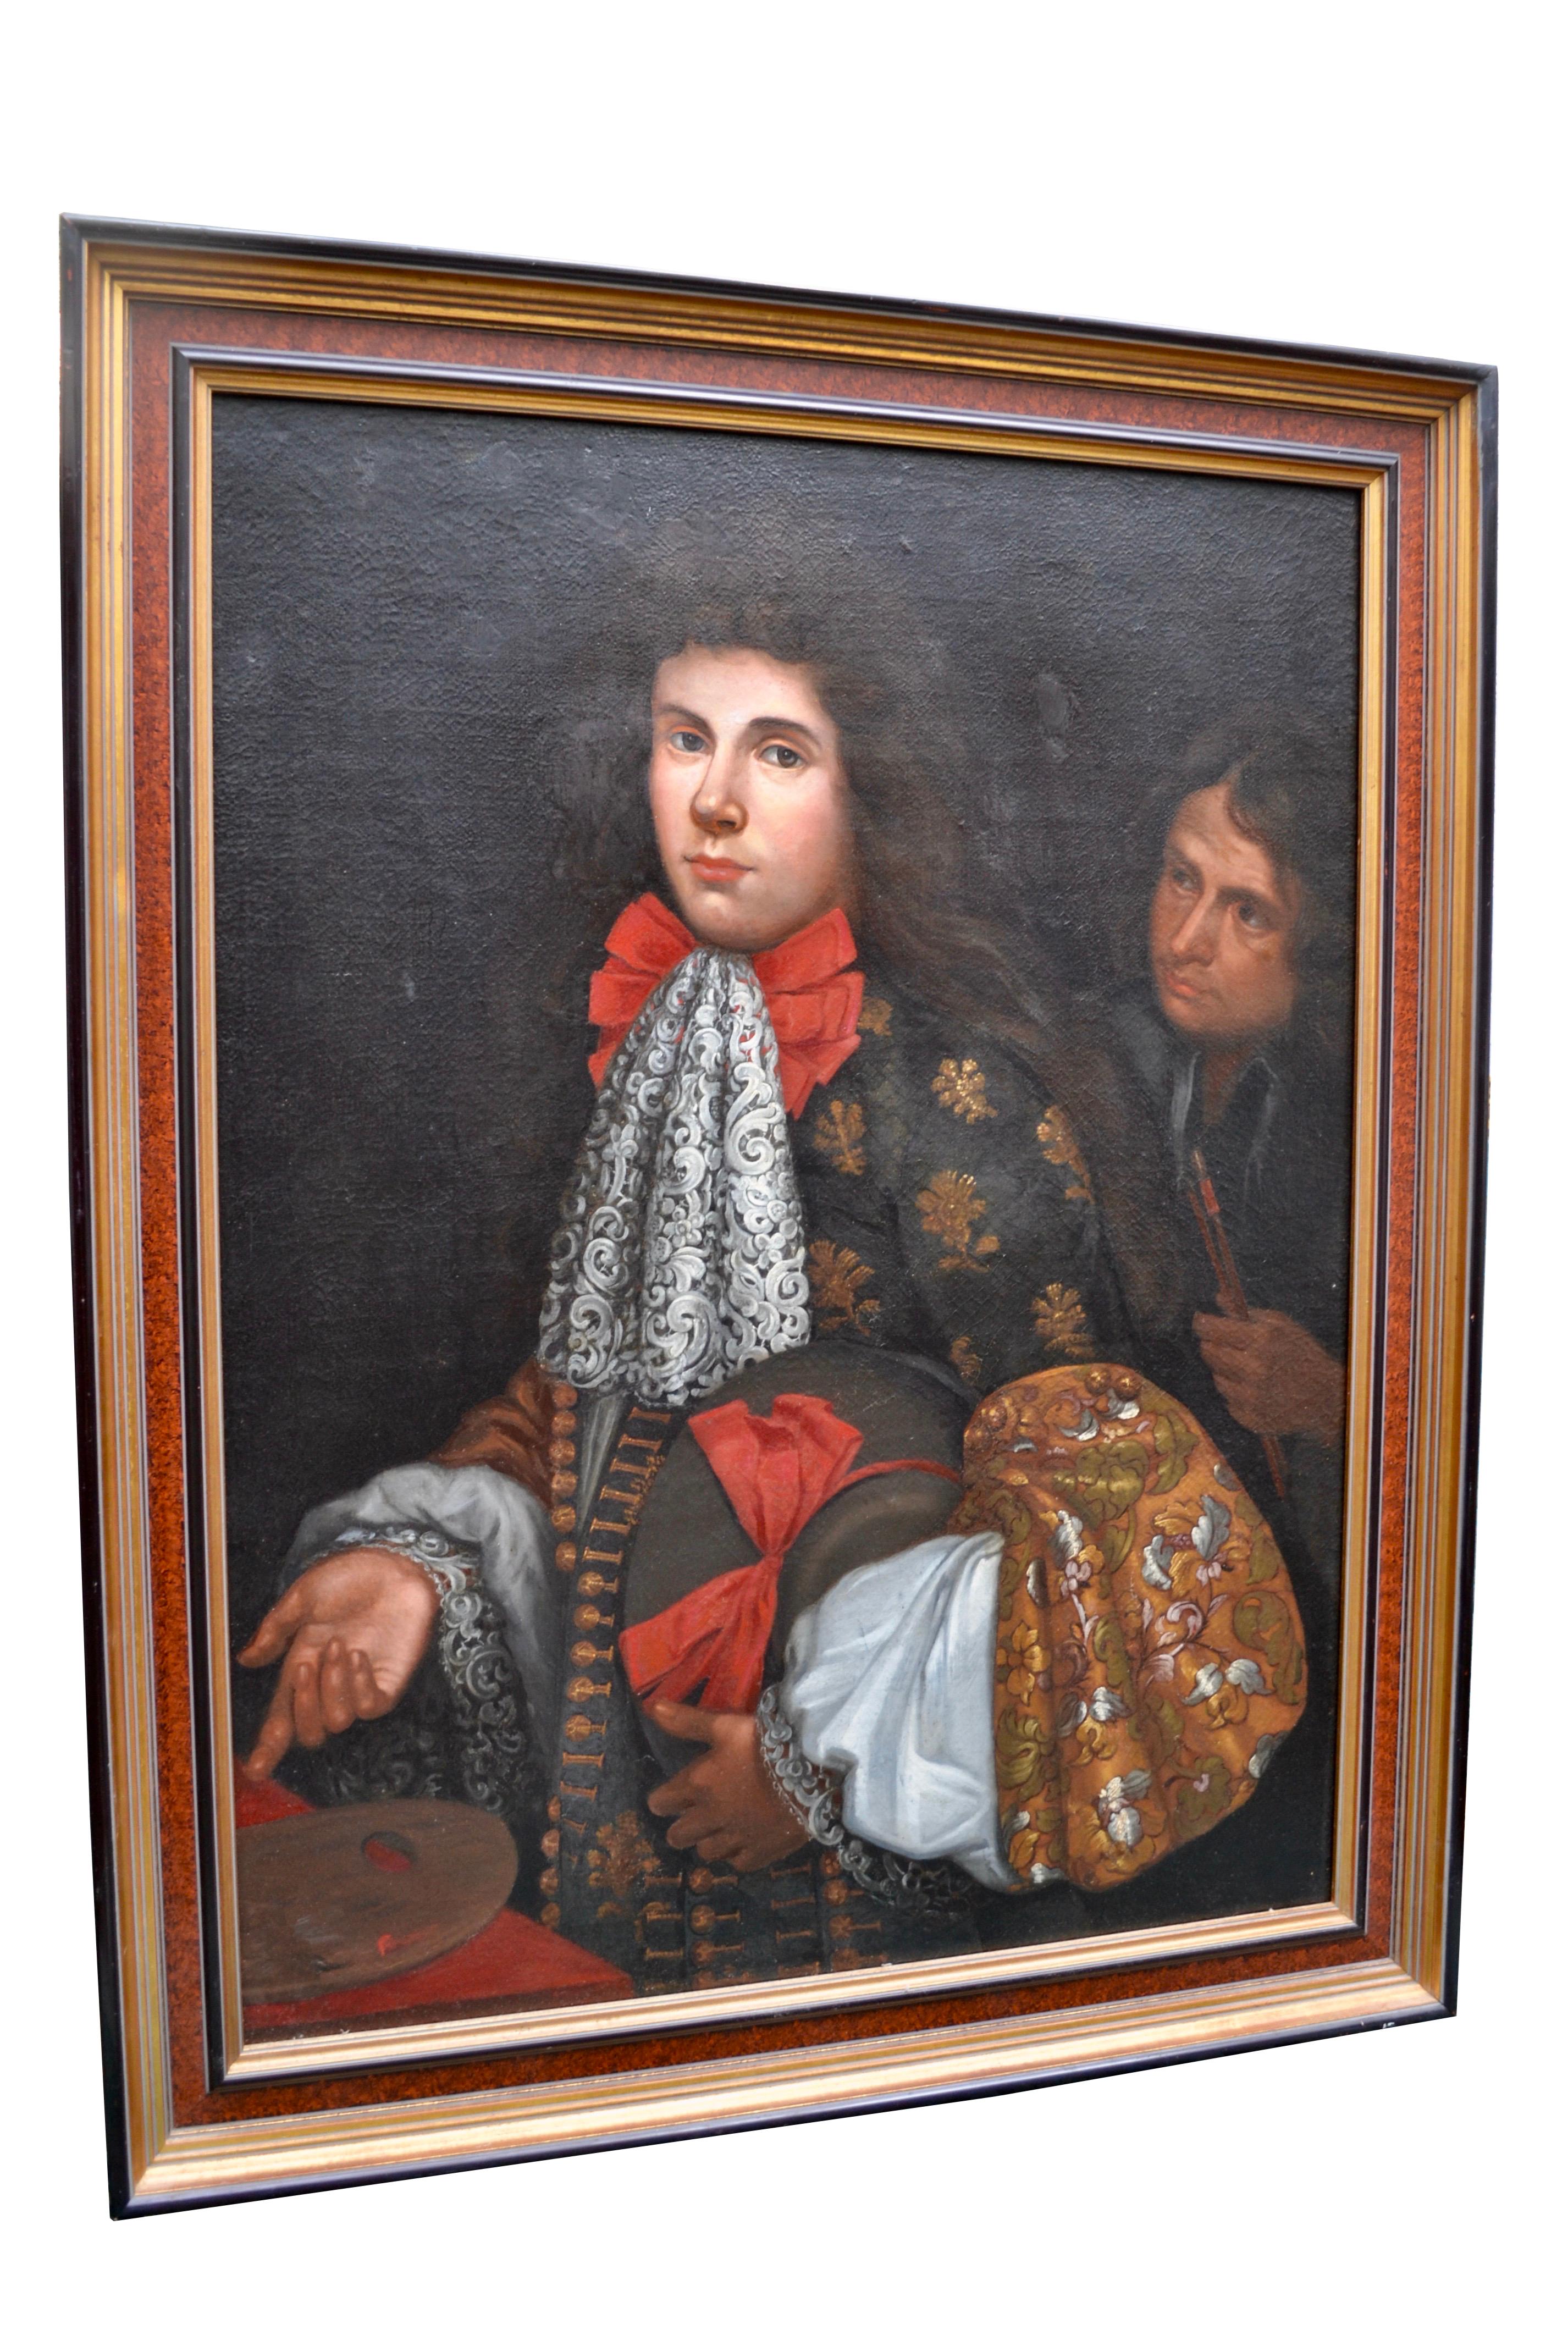 A 19th C three quarter length portrait of an aristocratic gentleman with his personal valet shown behind him. The young man with flowing long hair is portrayed from the waist up and dressed in very elaborate court finery. He is presented against a